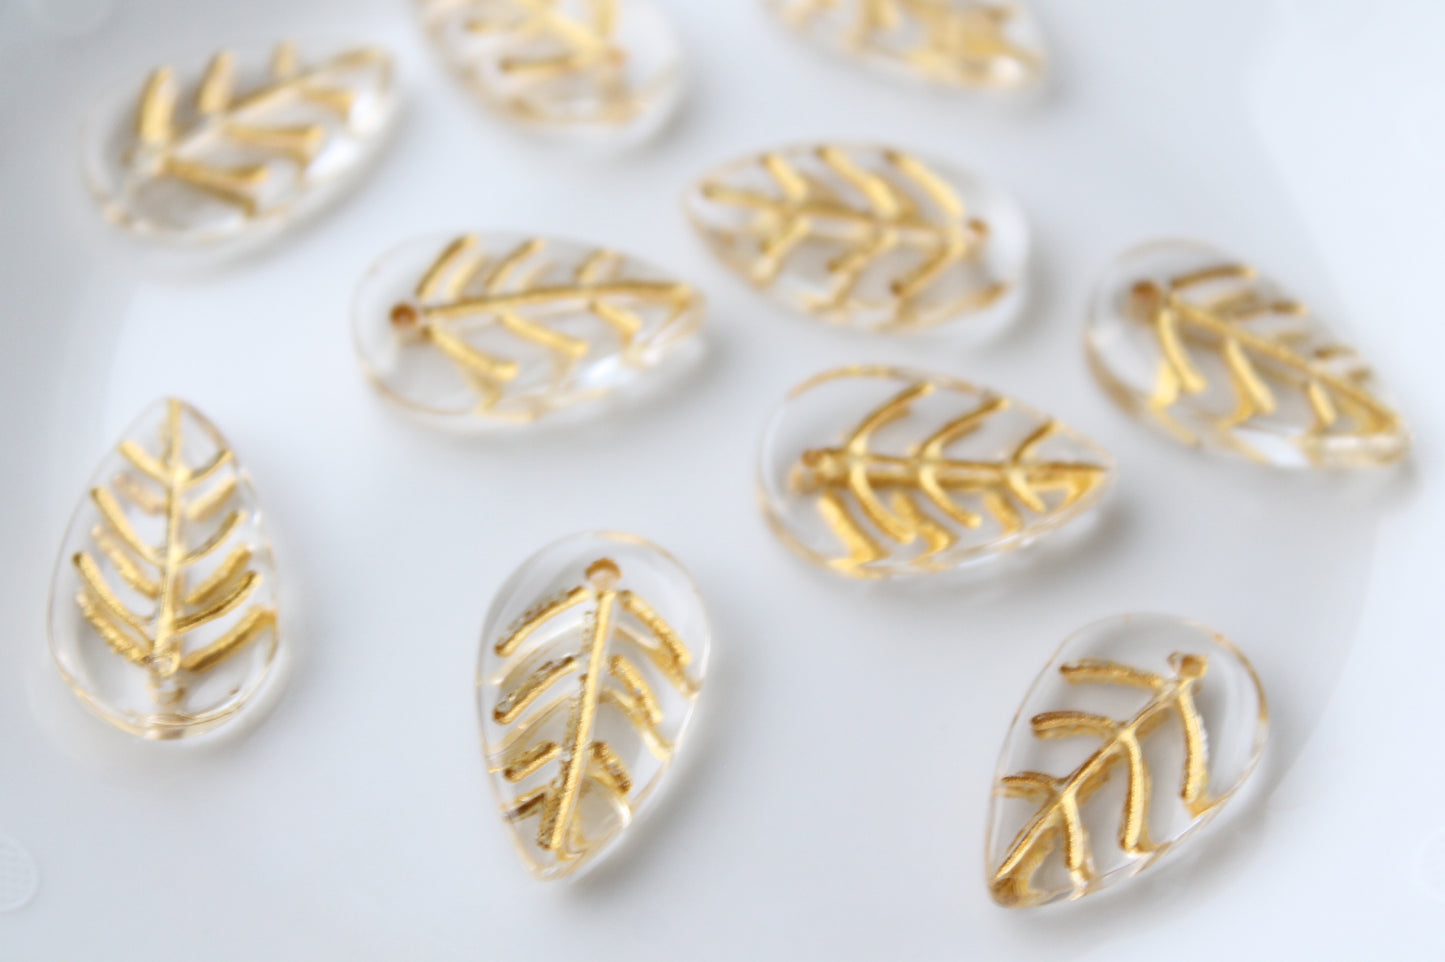 10pc Gold Inlay Glass Leaves